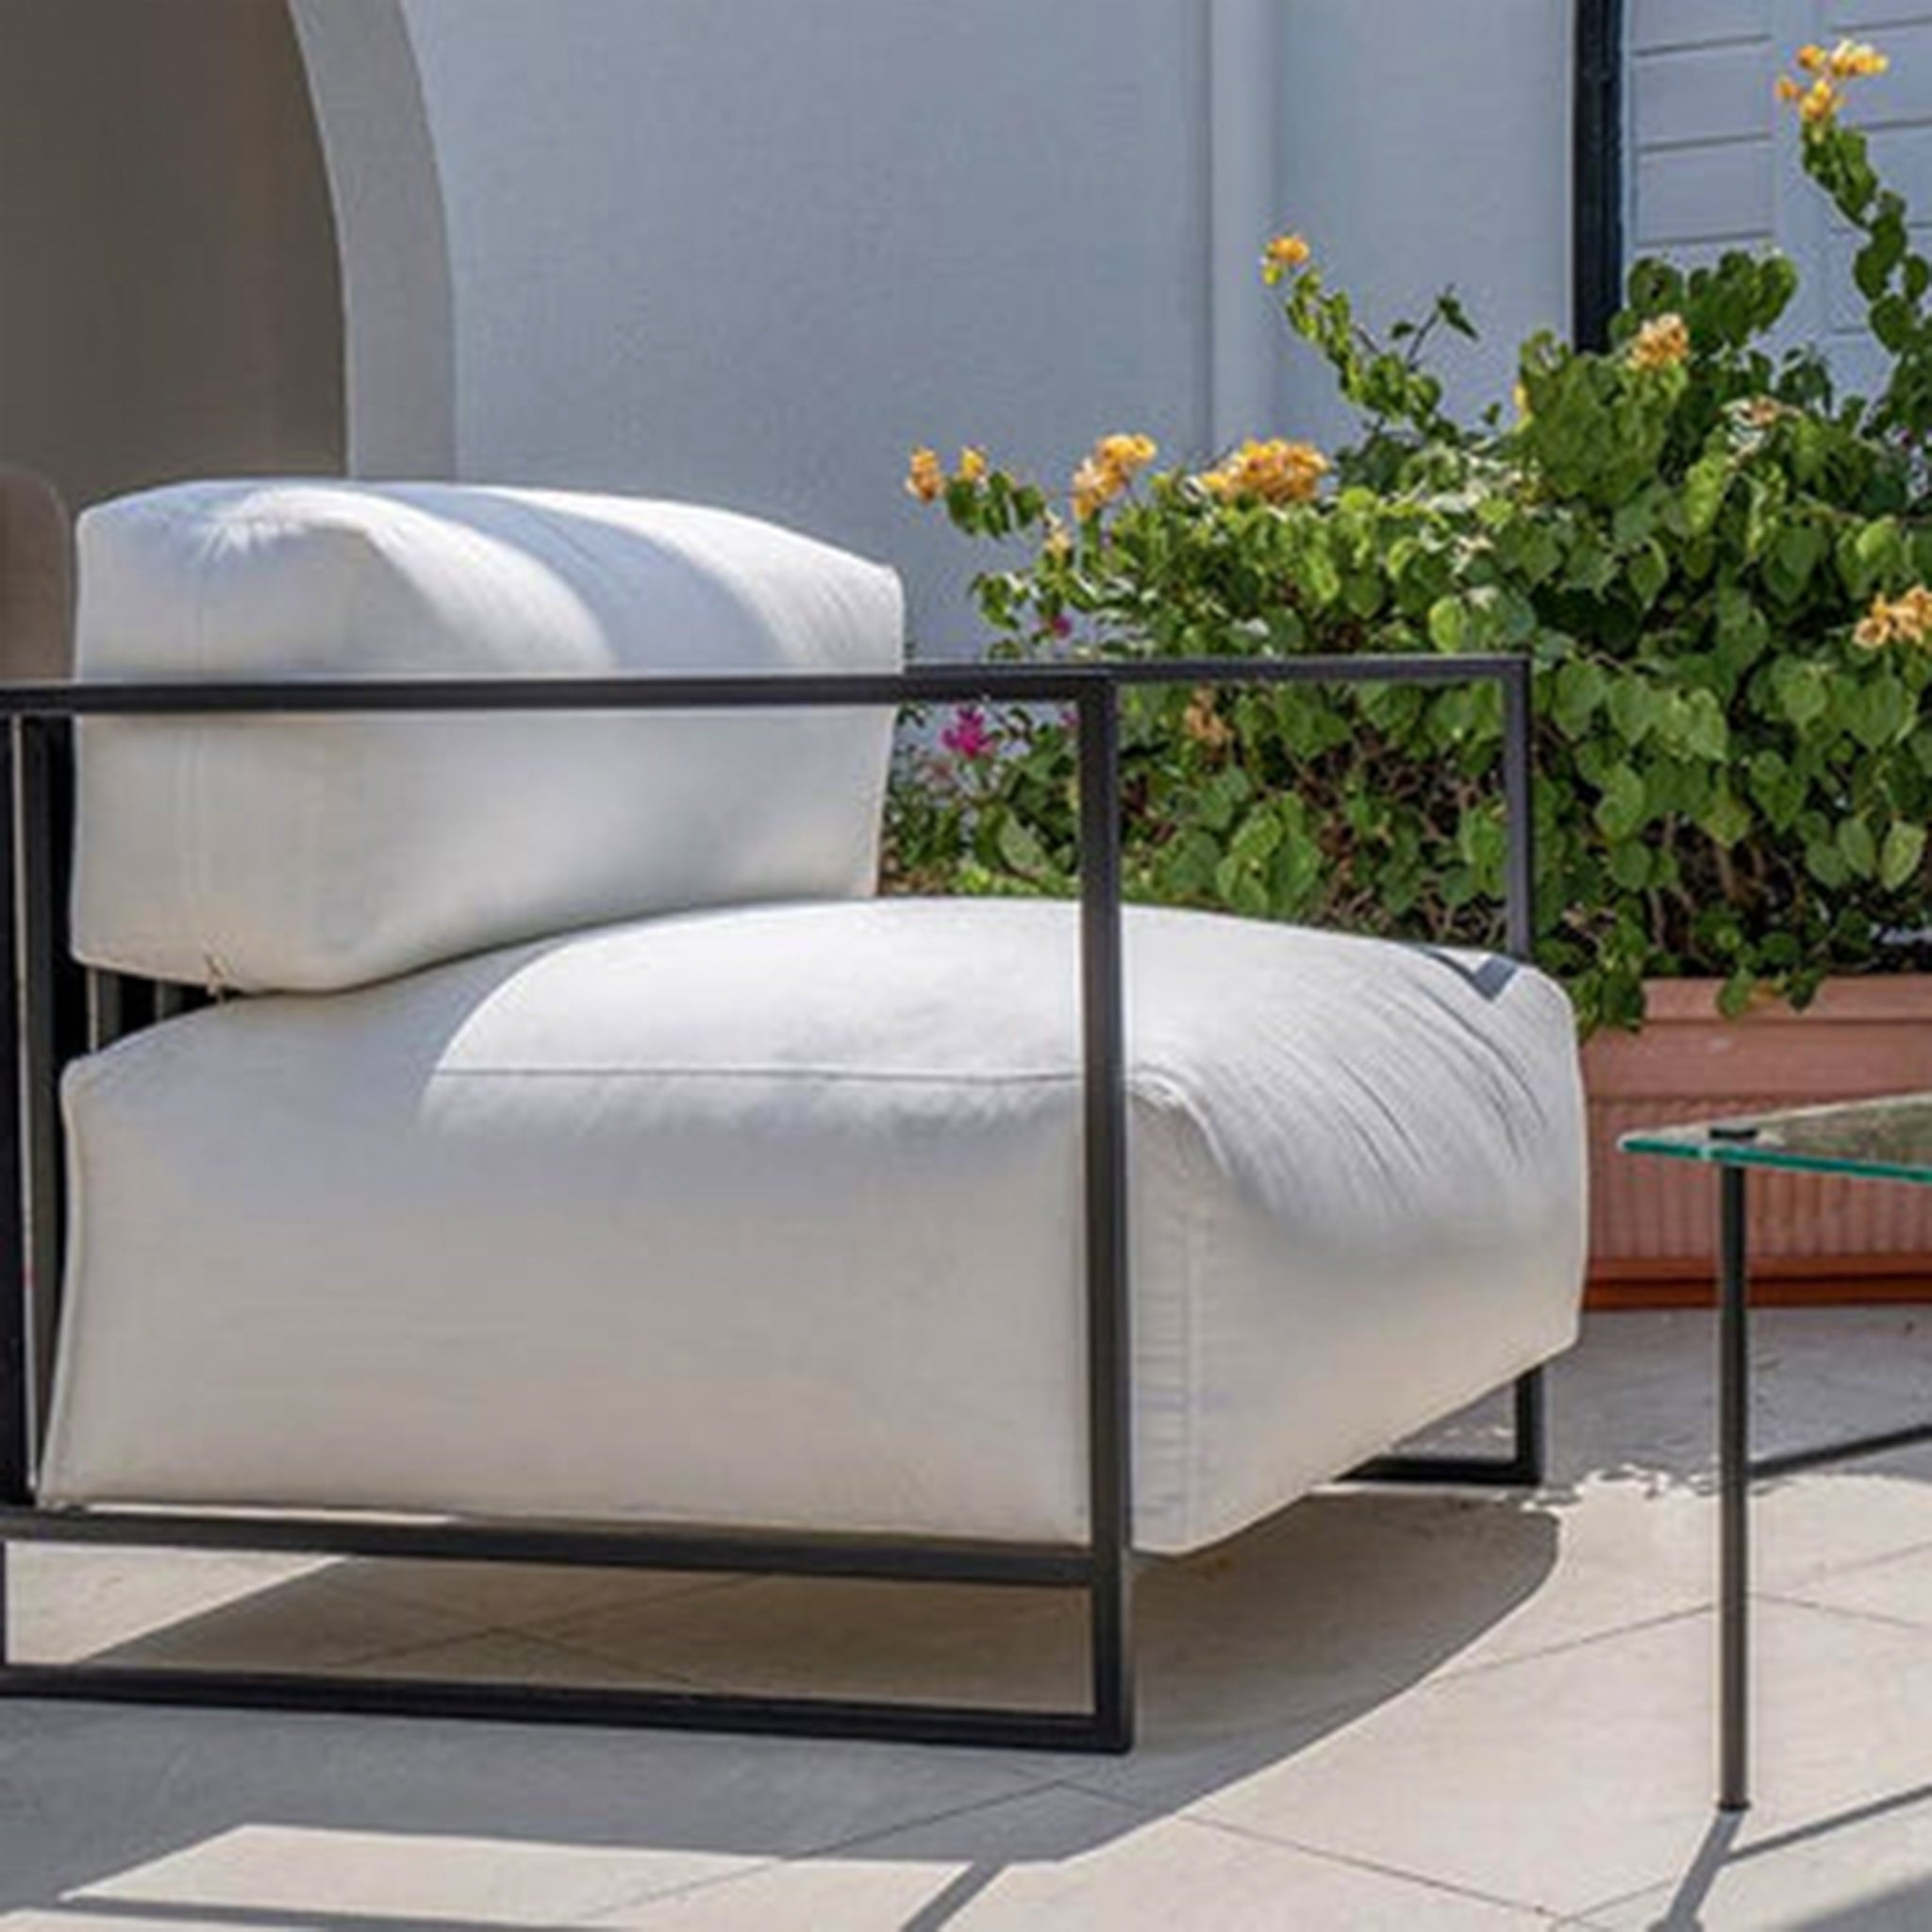 Outdoor setup featuring The Dexter Accent Chair with white cushions and a sleek black metal frame, placed on a patio with greenery and a glass side table.